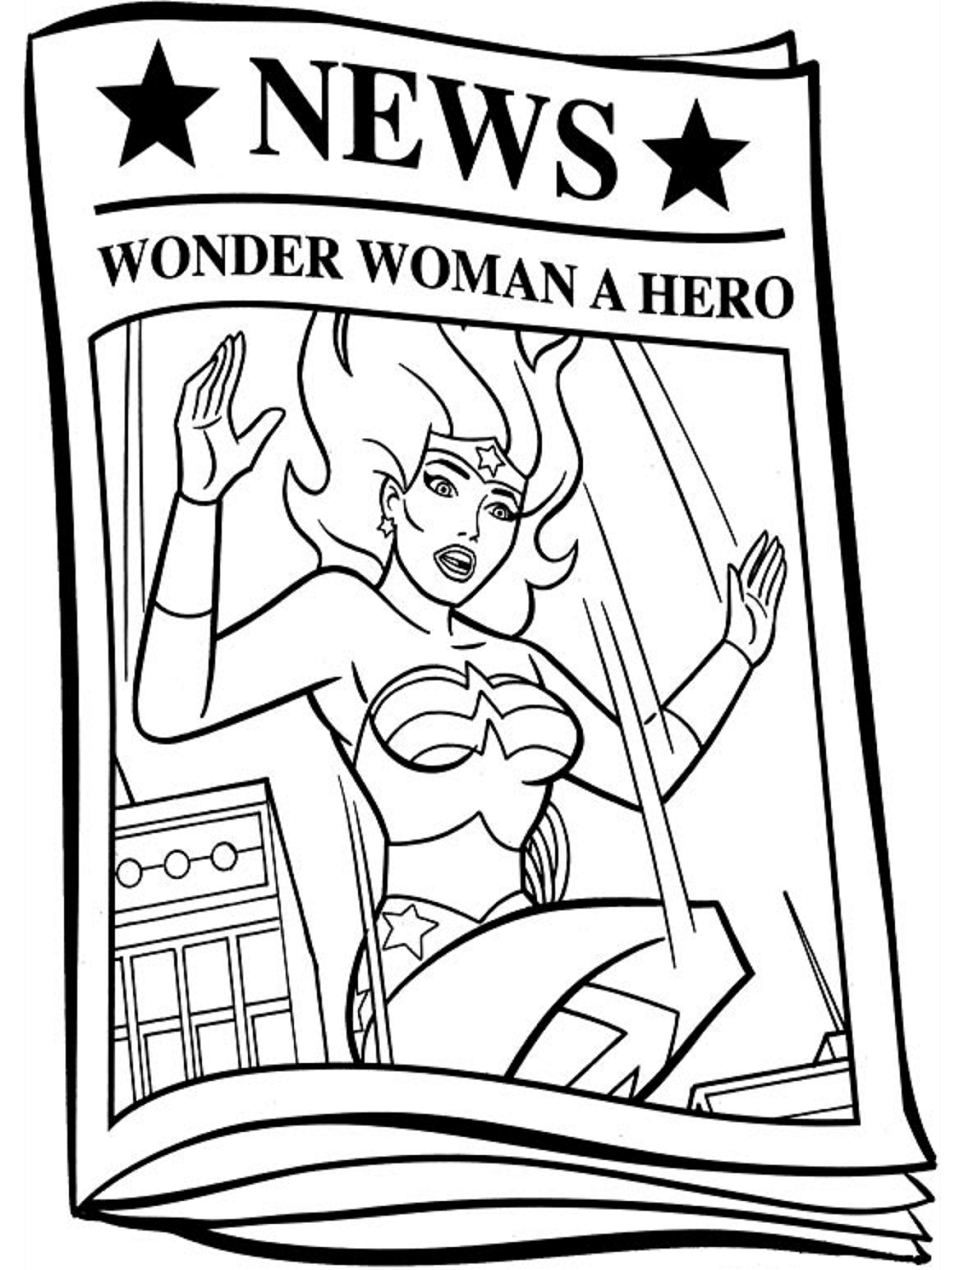 News About Wonder Woman Coloring Page